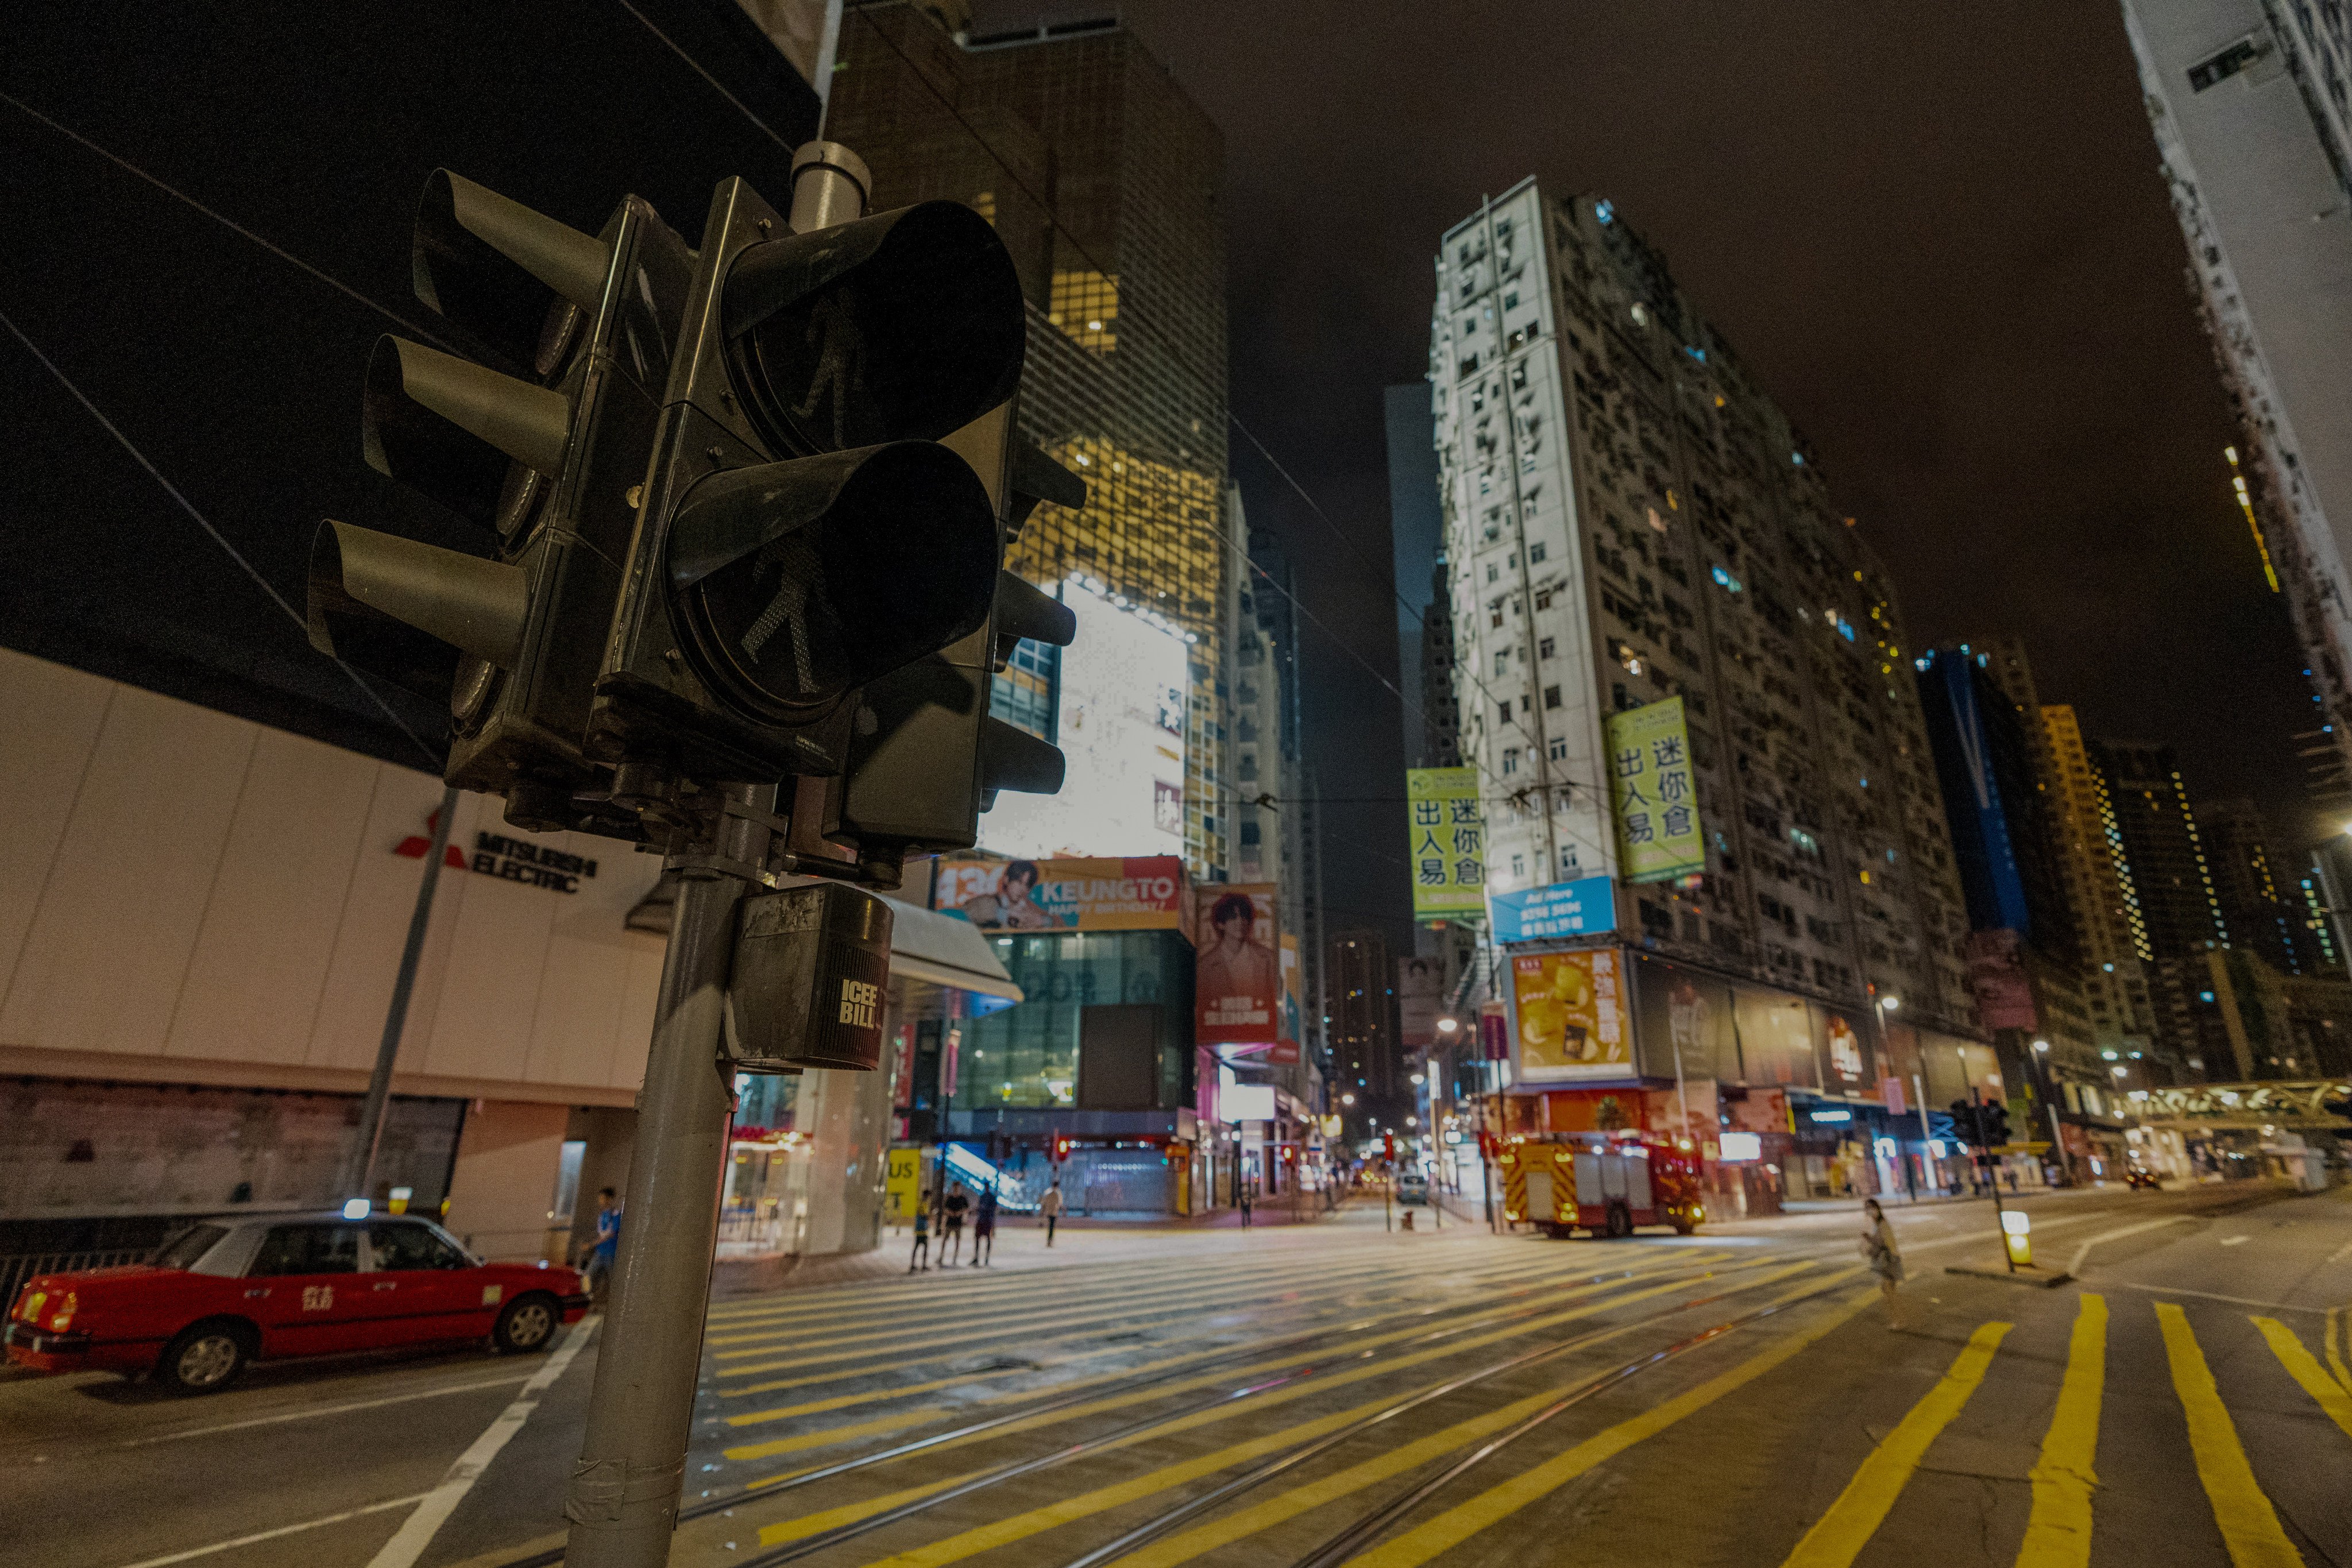 The power outage knocked out a number of traffic lights on Hong Kong Island. Photo: Harvey Kong